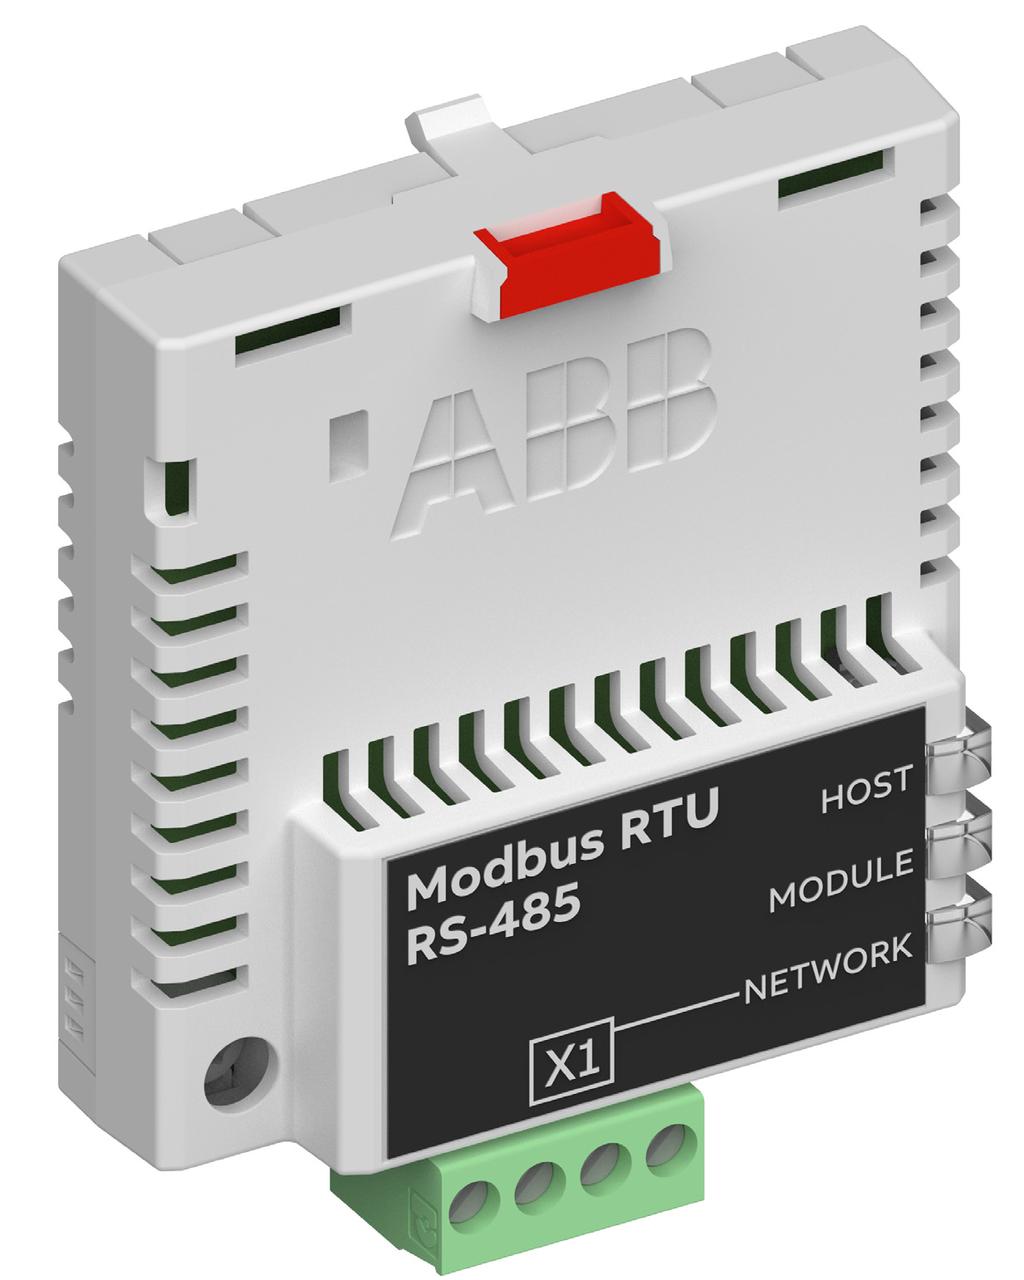 OPTION FOR ABB DRIVES, CONVERTERS AND